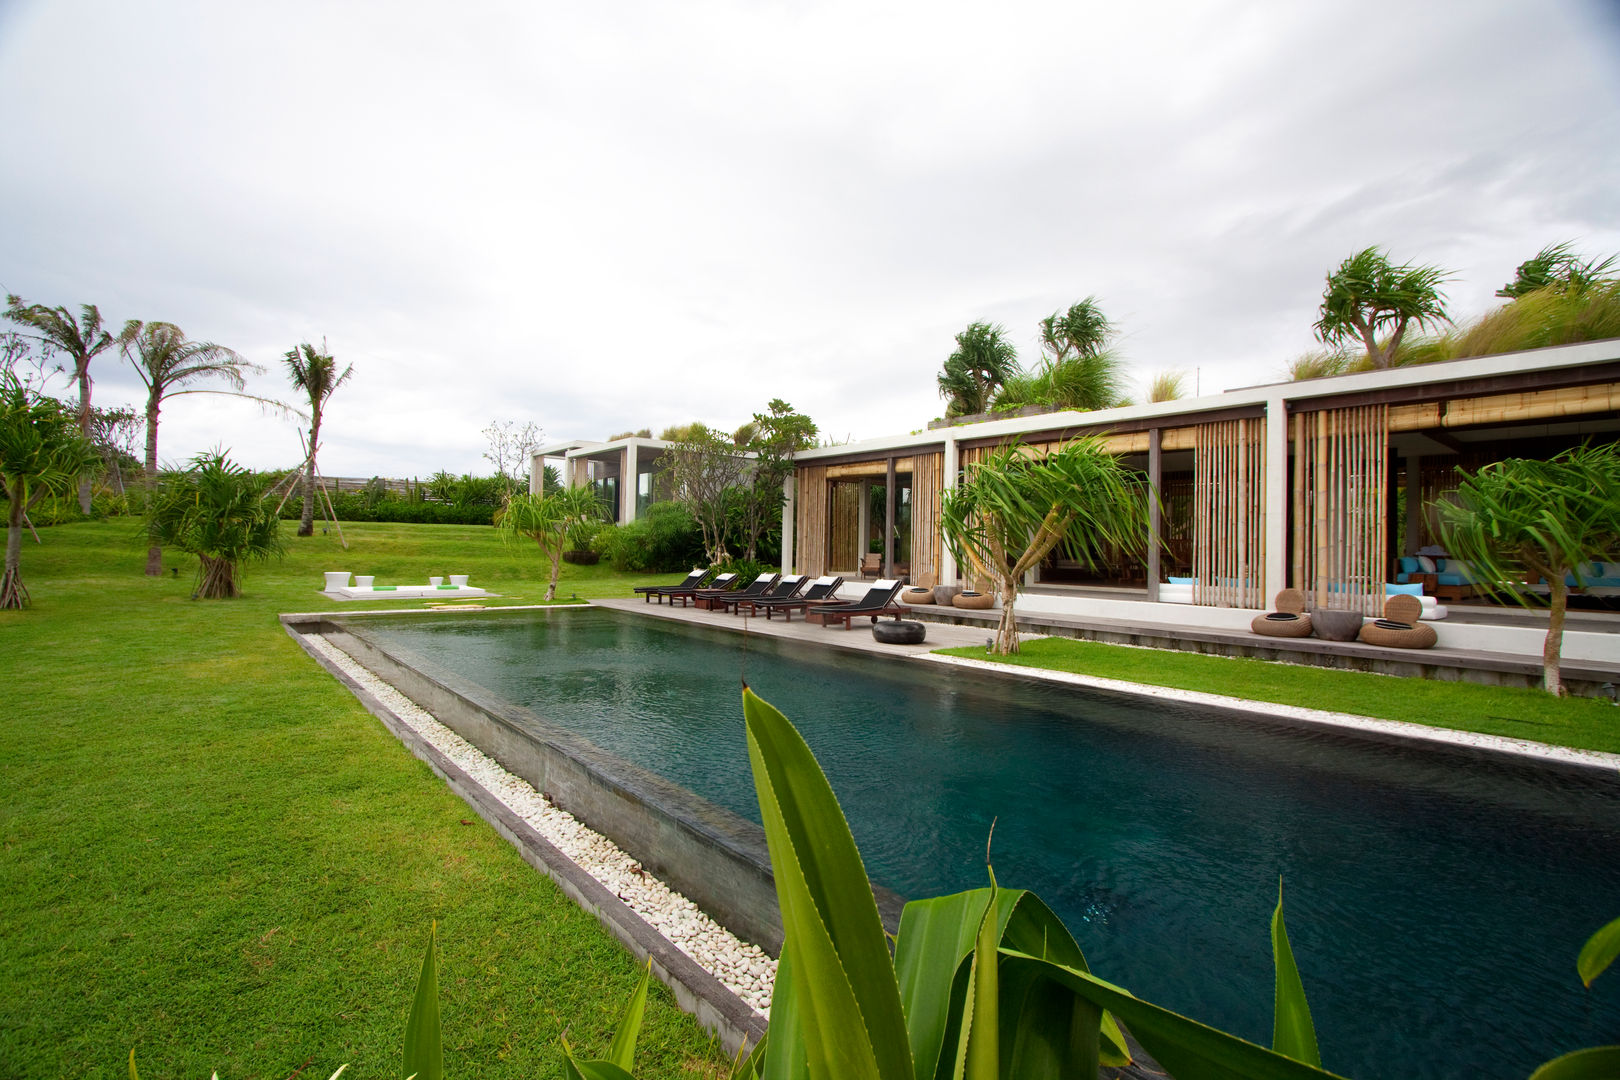 Villa Tantangan, Word of mouth WOM Word of mouth WOM Autres espaces Accessoires pour animaux